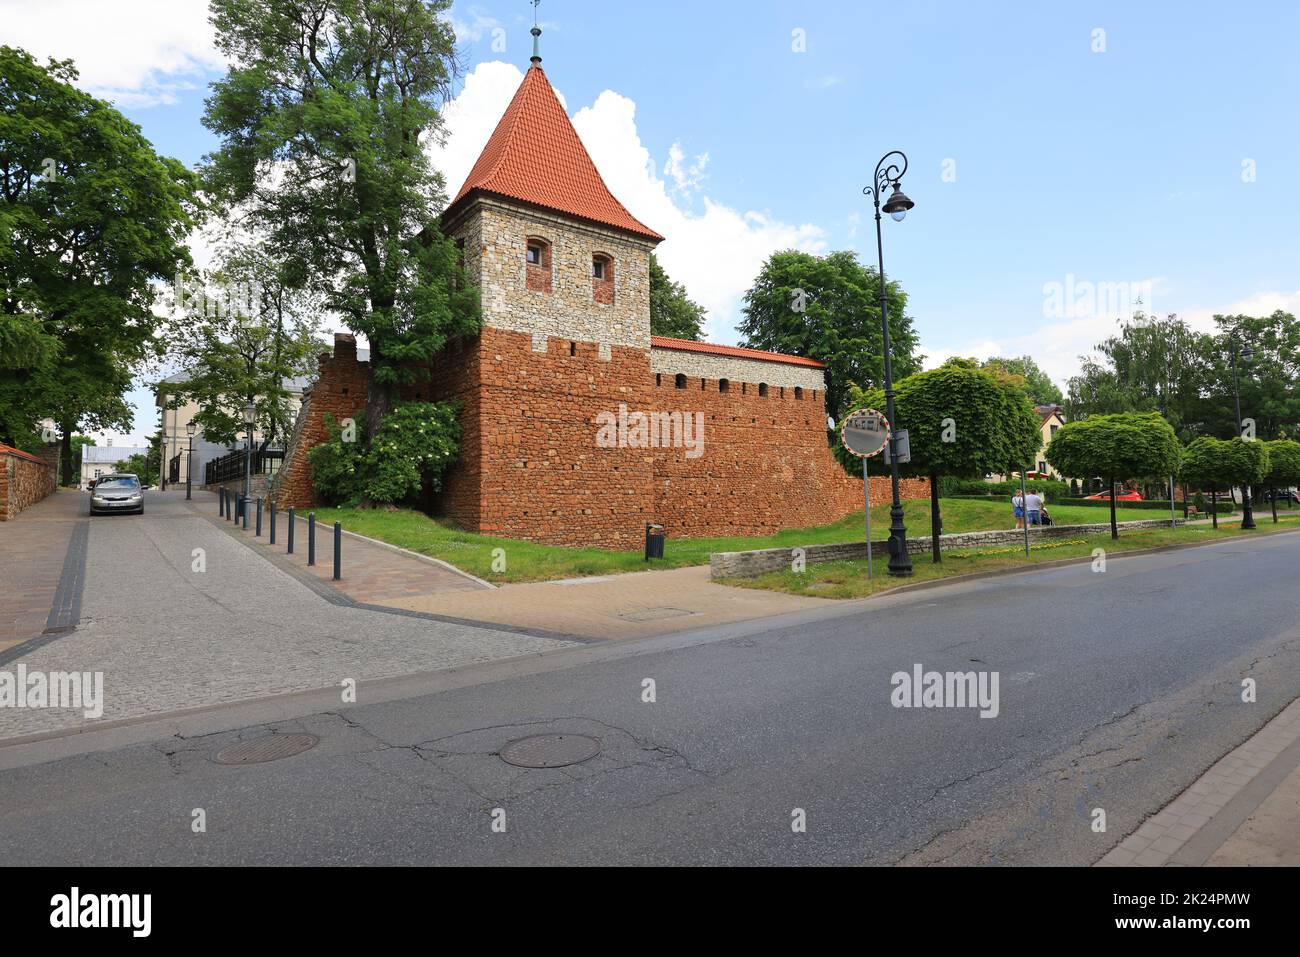 Olkusz, Poland - June 9, 2021: Tower and a fragment of city walls from the 14th century near Krakow Stock Photo